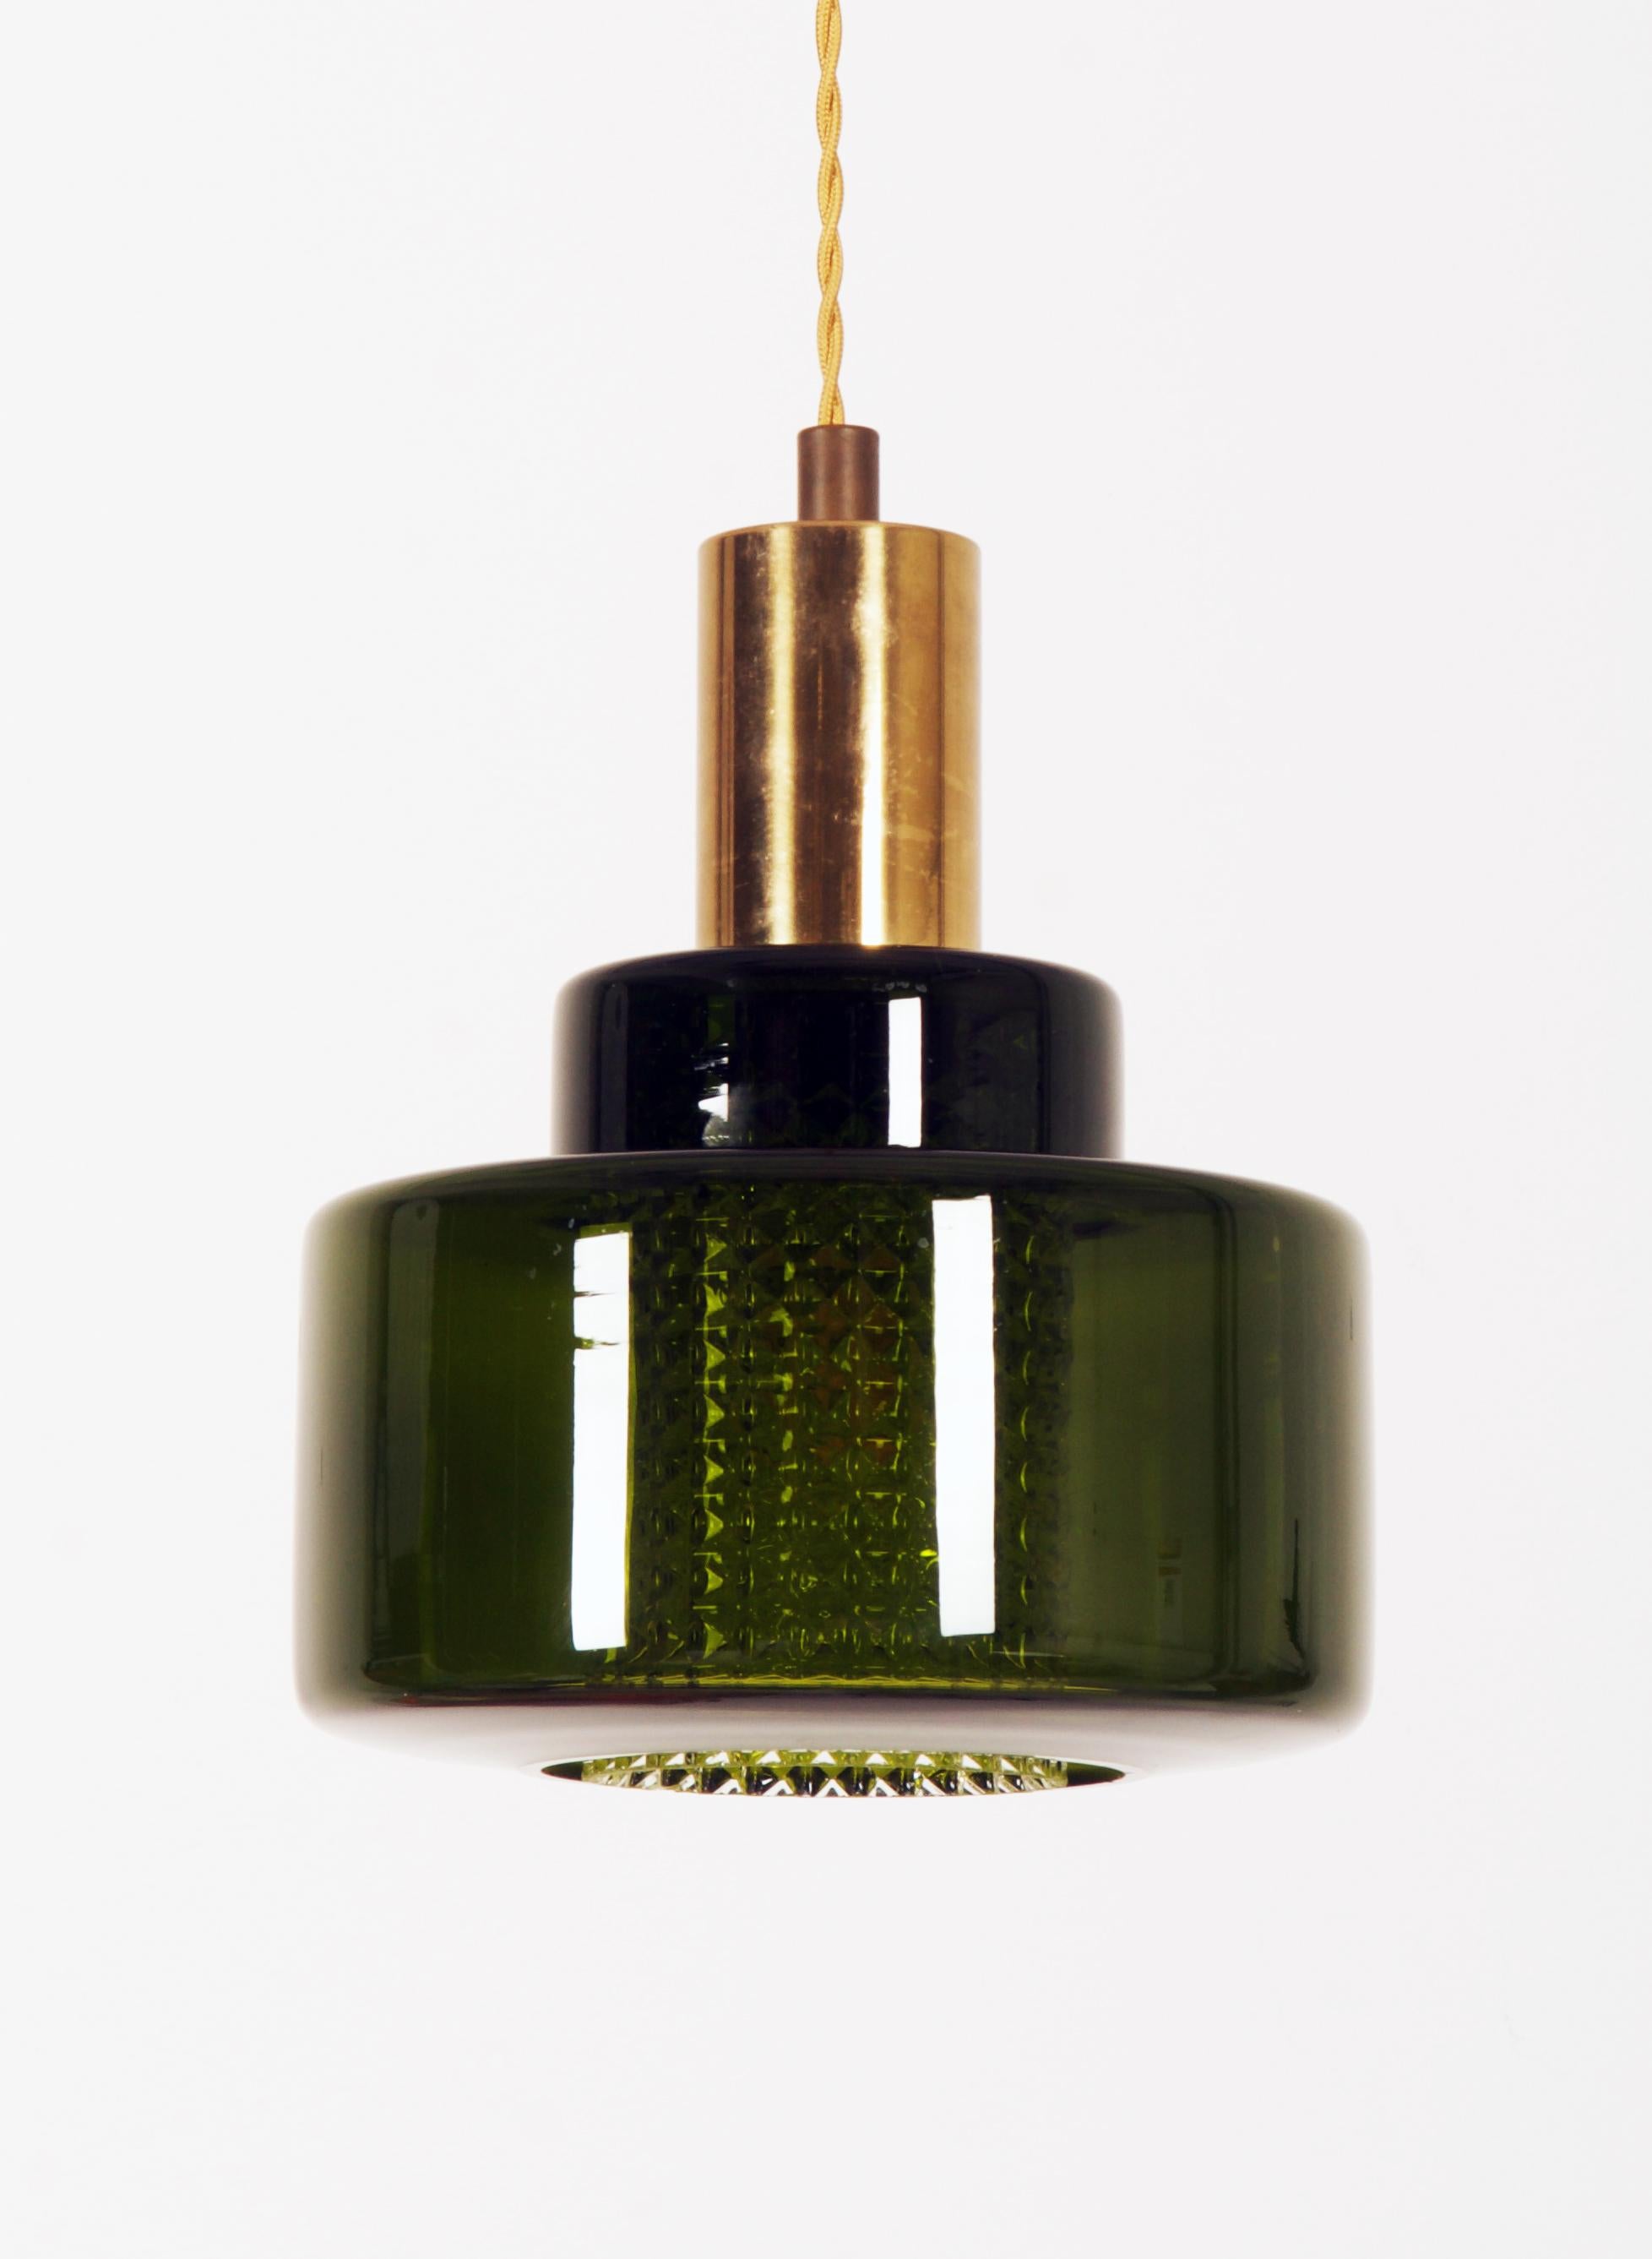 Mid-20th Century Green Glass Pendan by Carl Fagerlund for Orrefors Glassworks For Sale